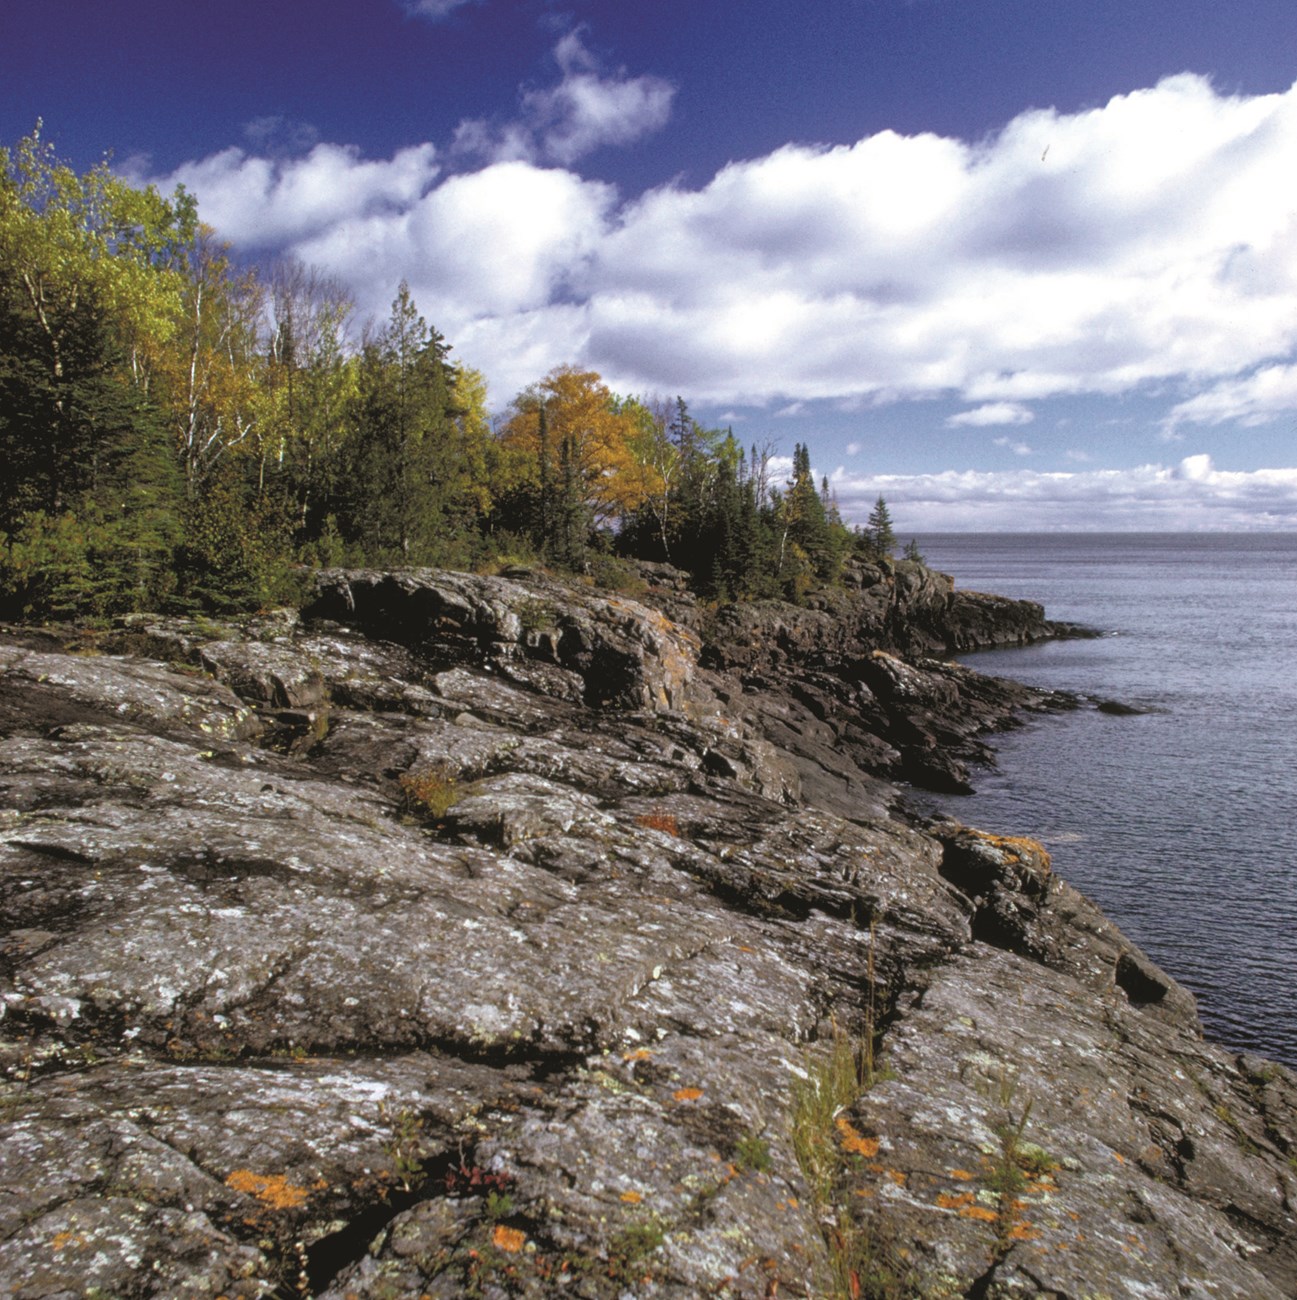 photo of the rocky shoreline of an island